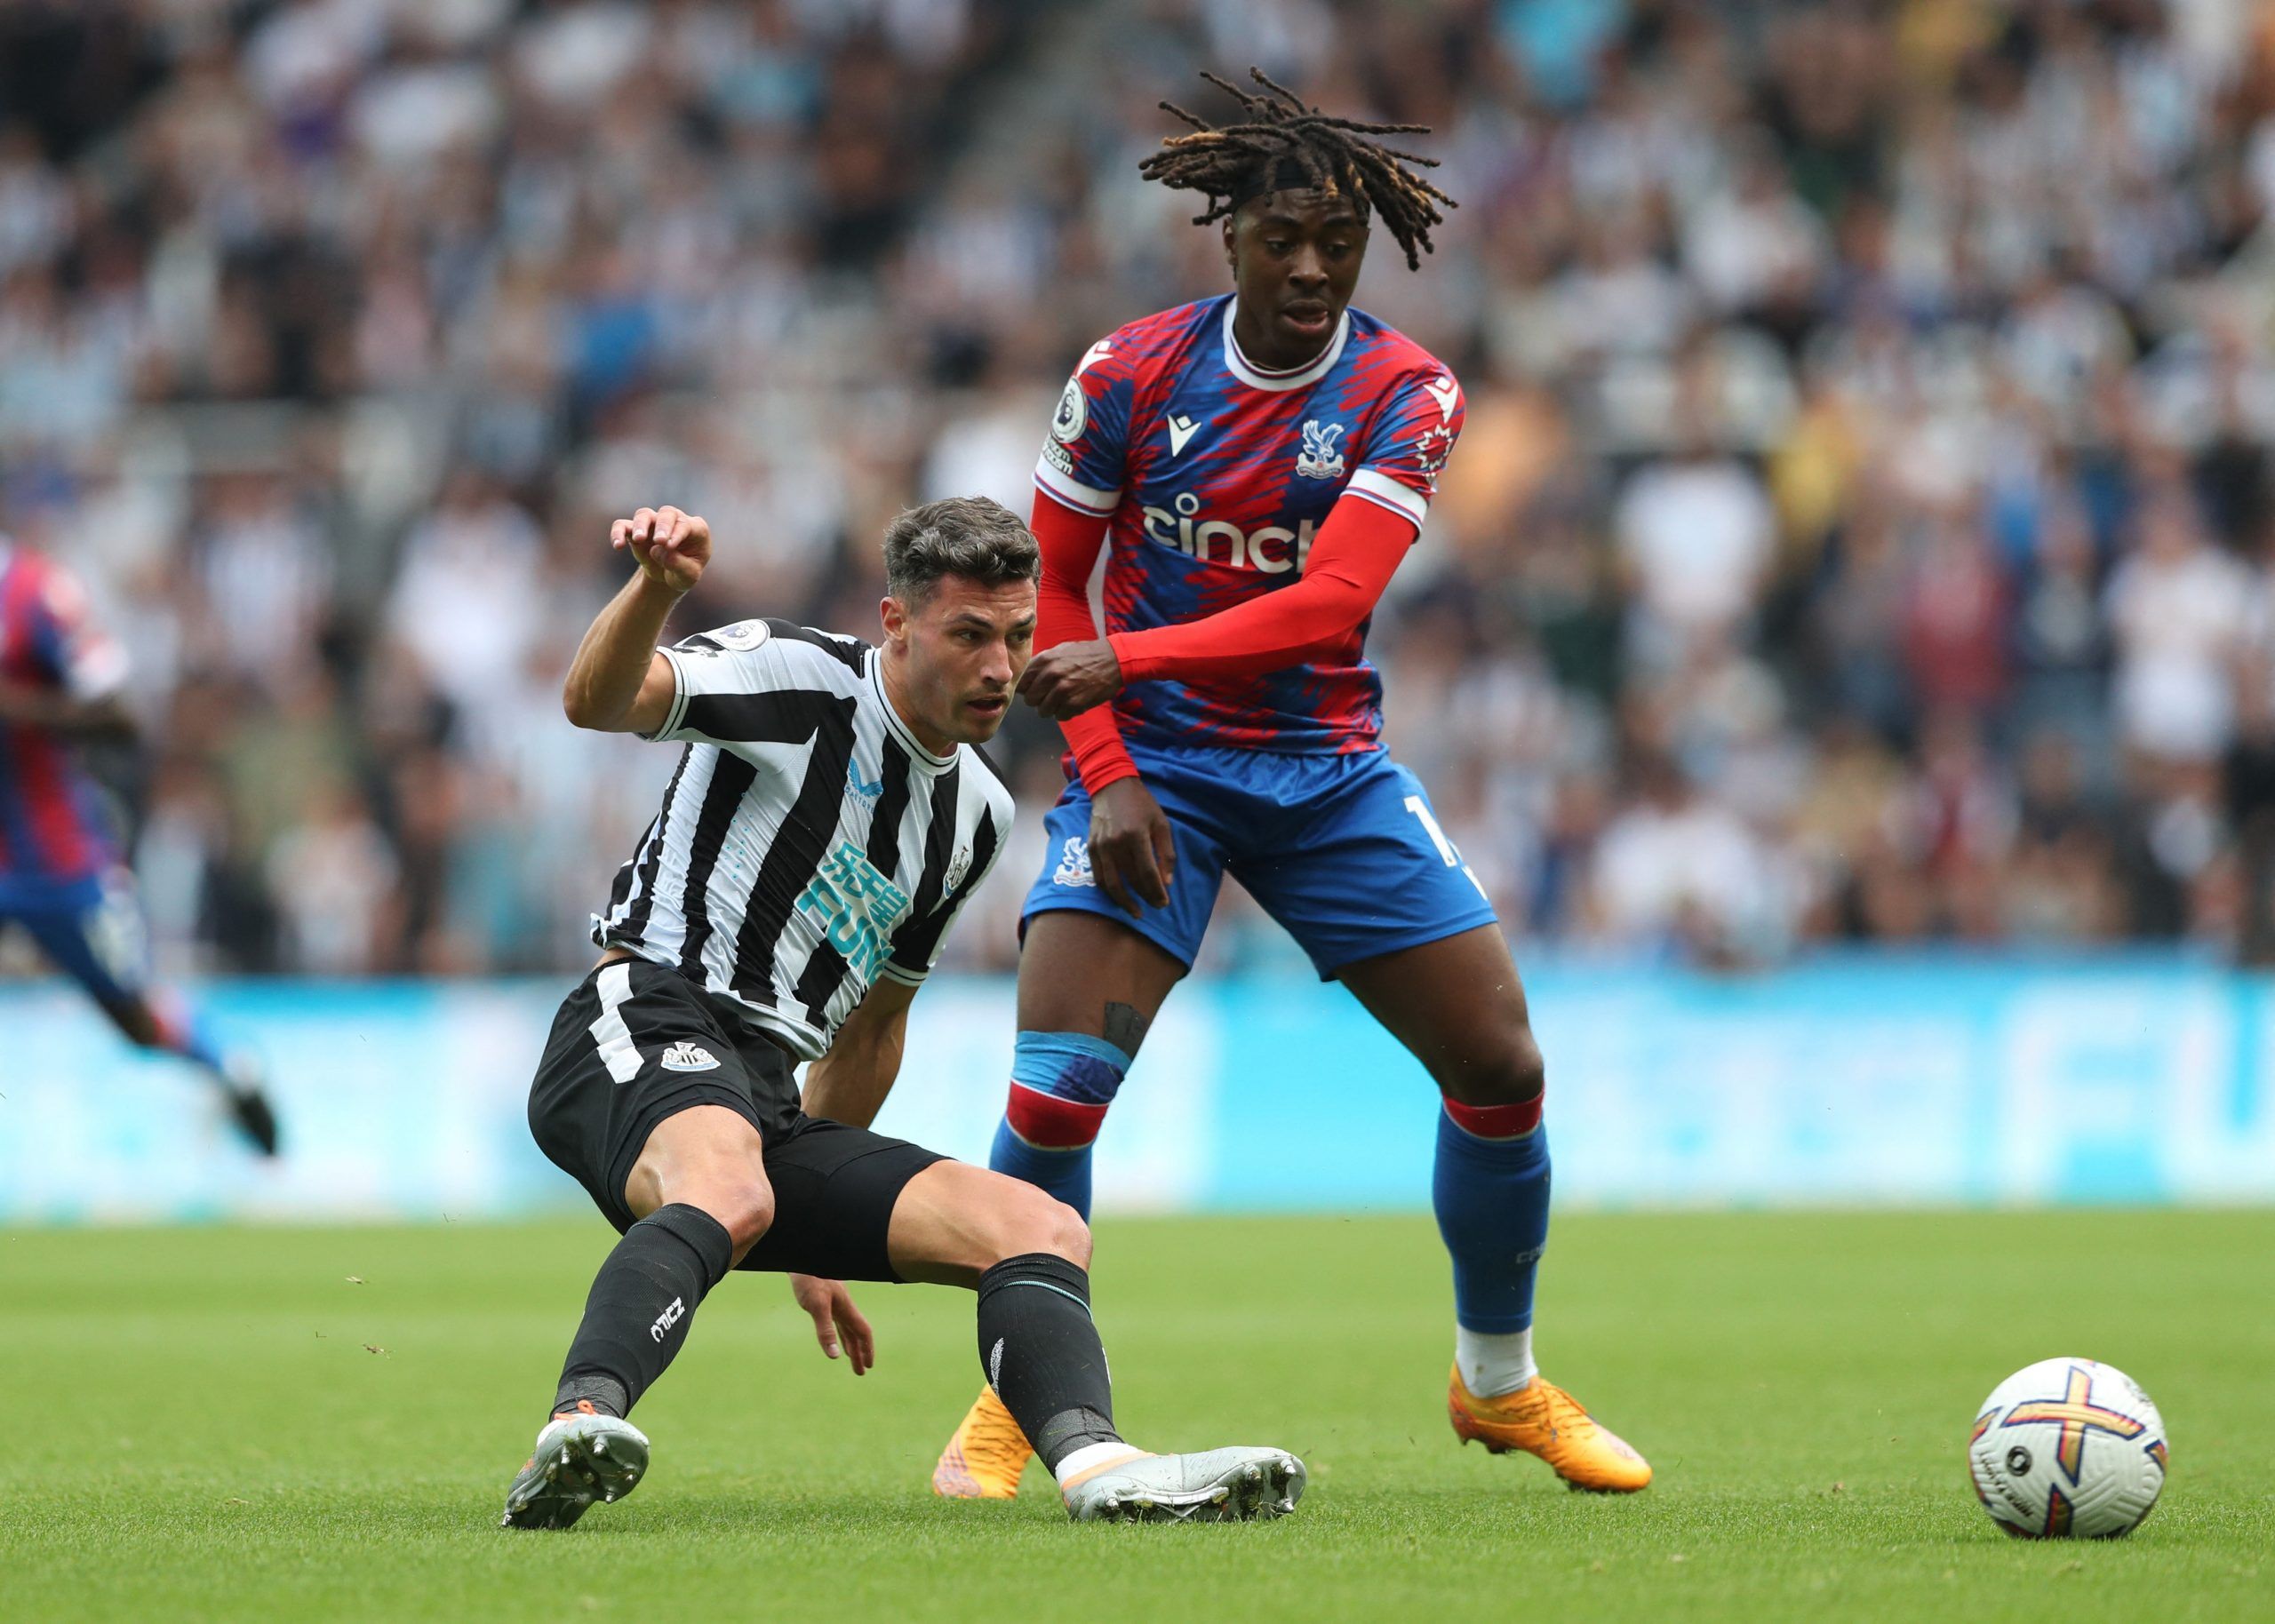 Soccer Football - Premier League - Newcastle United v Crystal Palace - St James' Park, Newcastle, Britain - September 3, 2022 Newcastle United's Fabian Schar in action with Crystal Palace's Eberechi Eze REUTERS/Scott Heppell EDITORIAL USE ONLY. No use with unauthorized audio, video, data, fixture lists, club/league logos or 'live' services. Online in-match use limited to 75 images, no video emulation. No use in betting, games or single club /league/player publications.  Please contact your accou